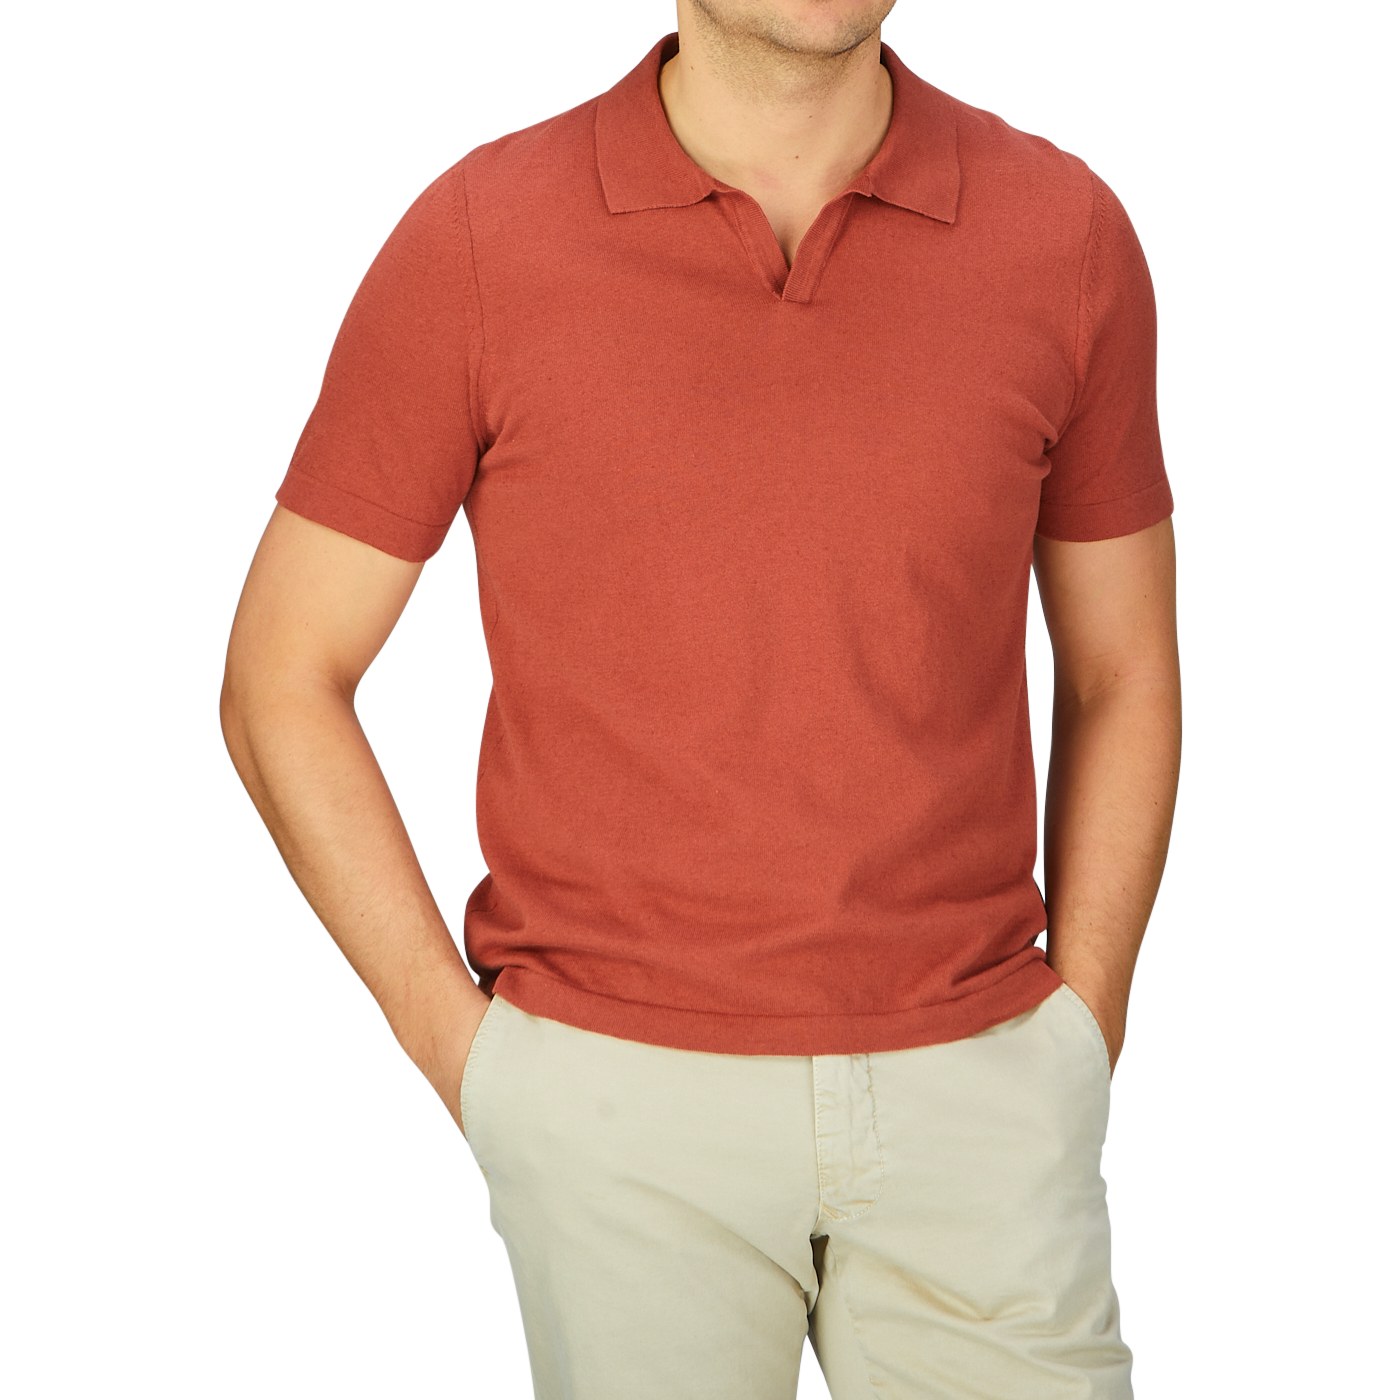 A man wearing a G.R.P rust red cotton linen polo shirt and khaki pants.